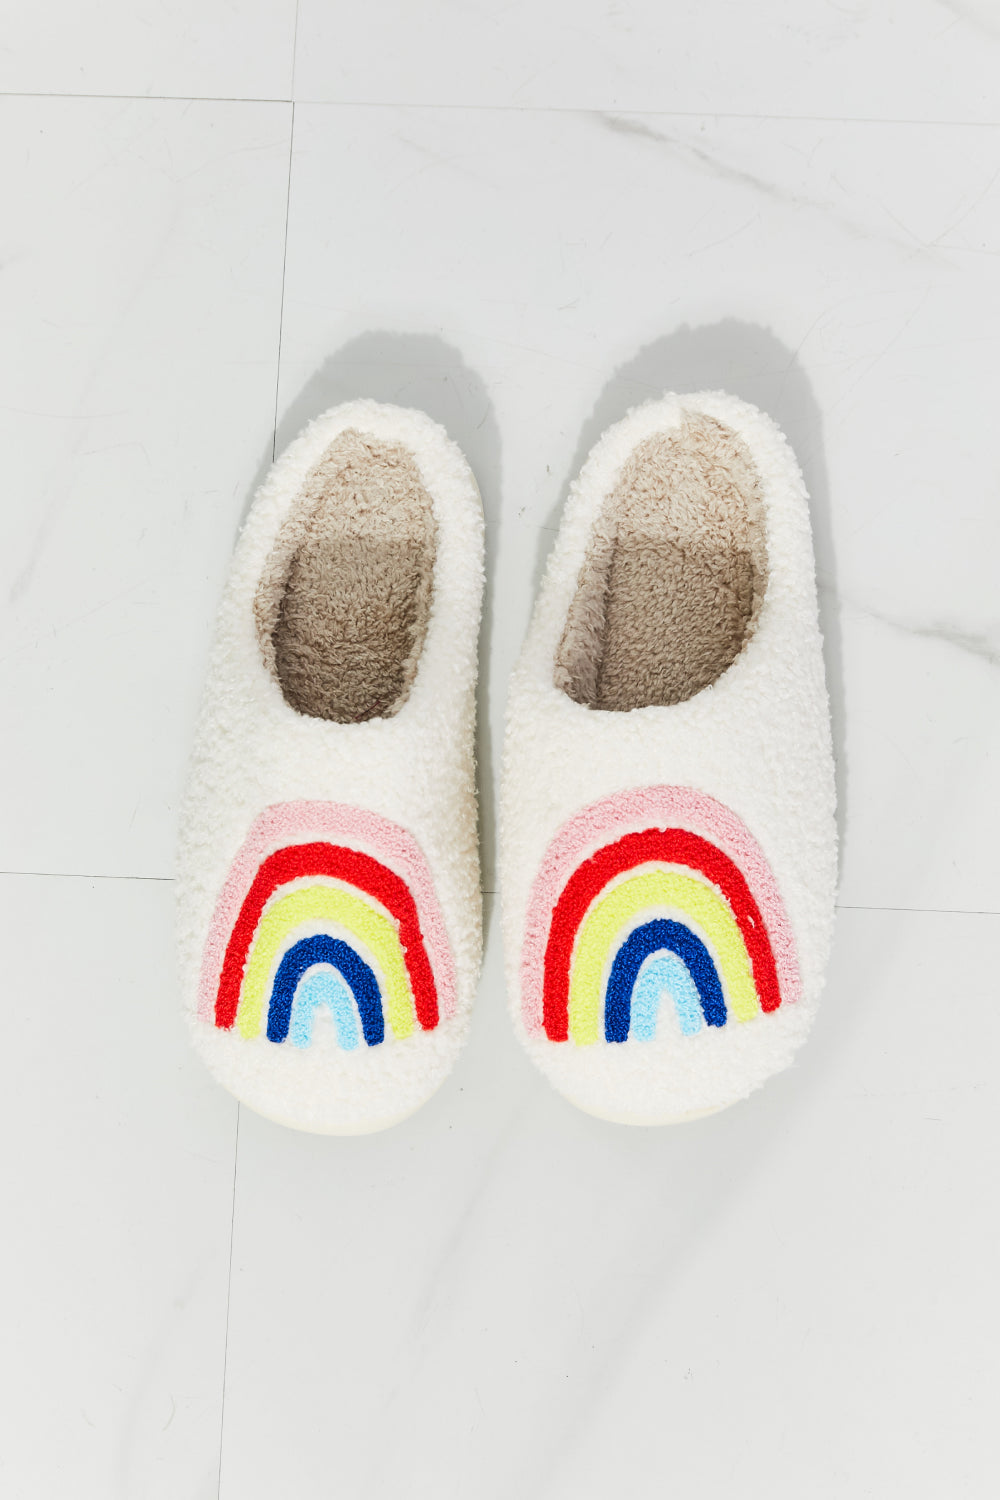 MMShoes Rainbow Fuzzy Teddy Bear Plush Slide On Comfy Slippers Multicolor on White